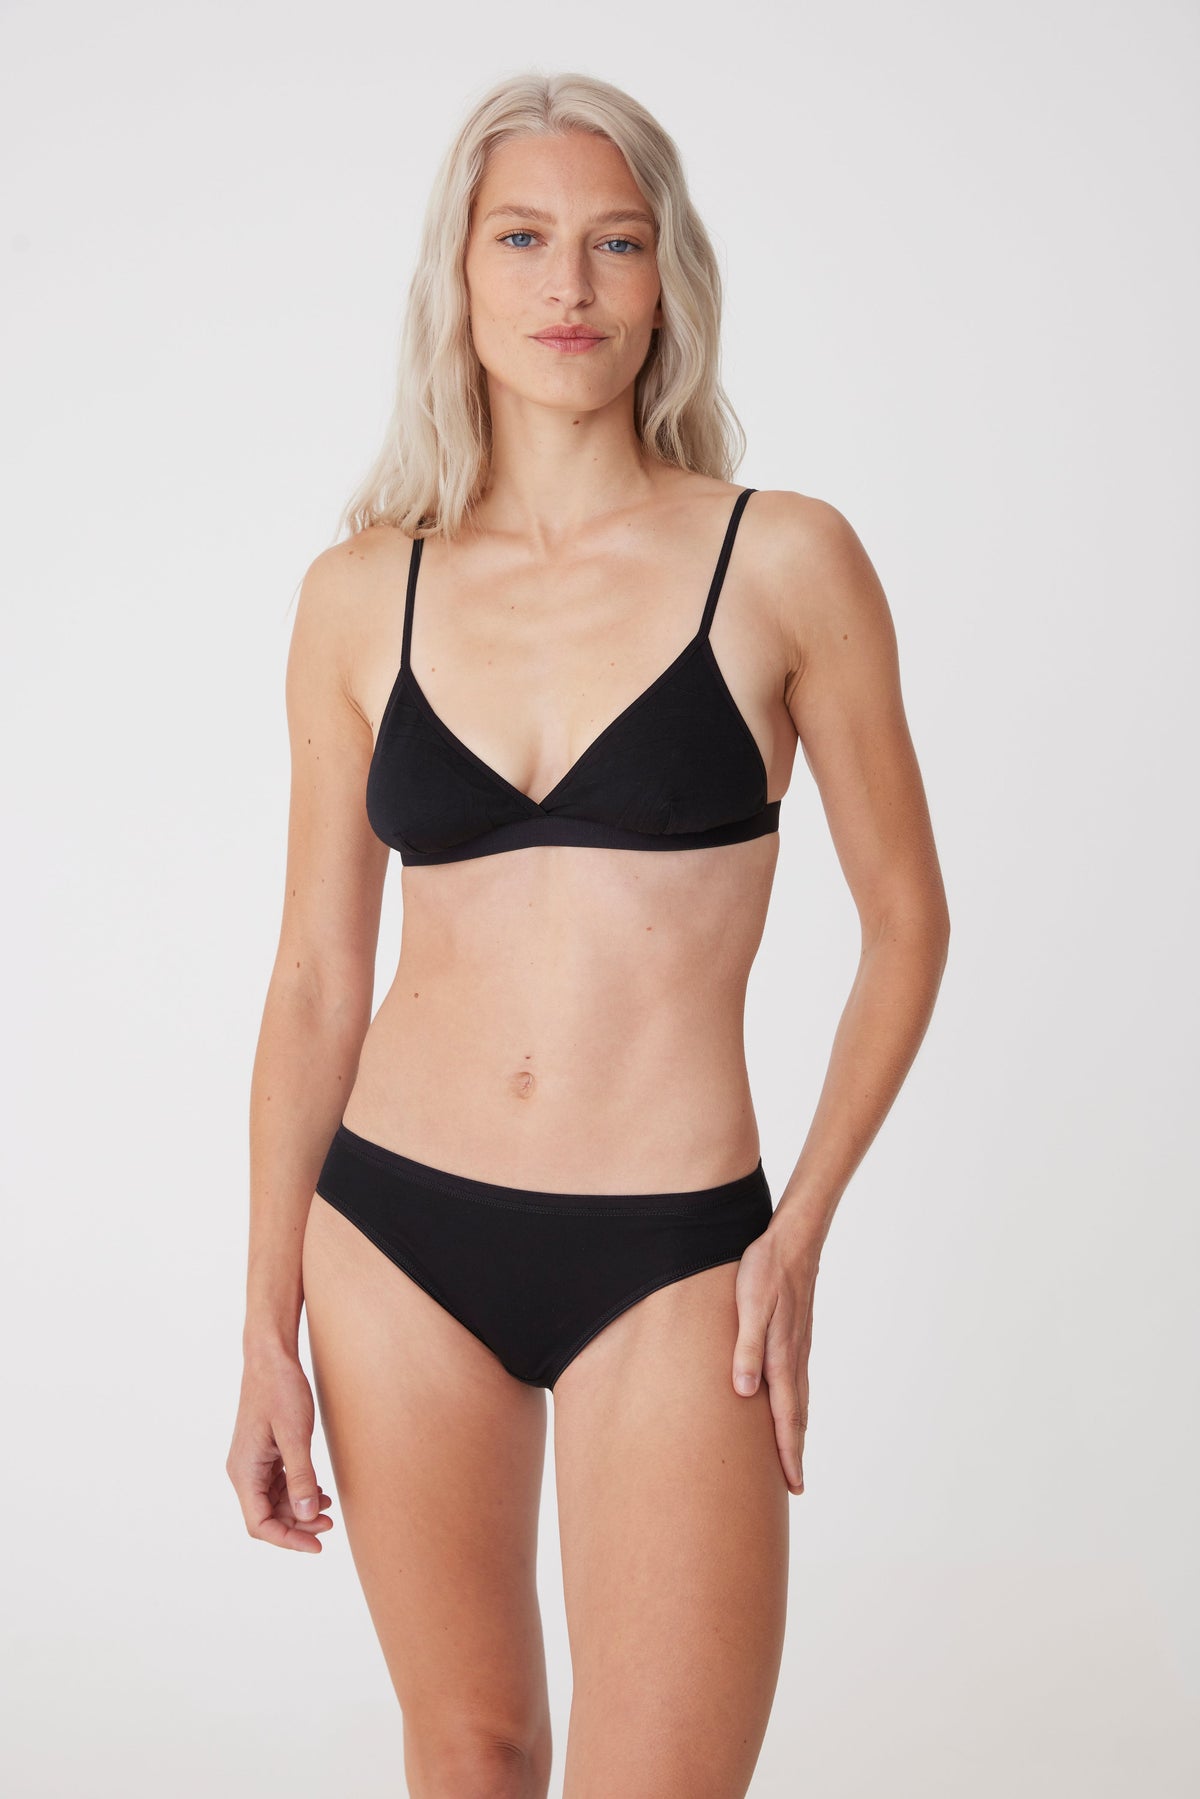 
            Blonde, white female wearing low rise brief in black